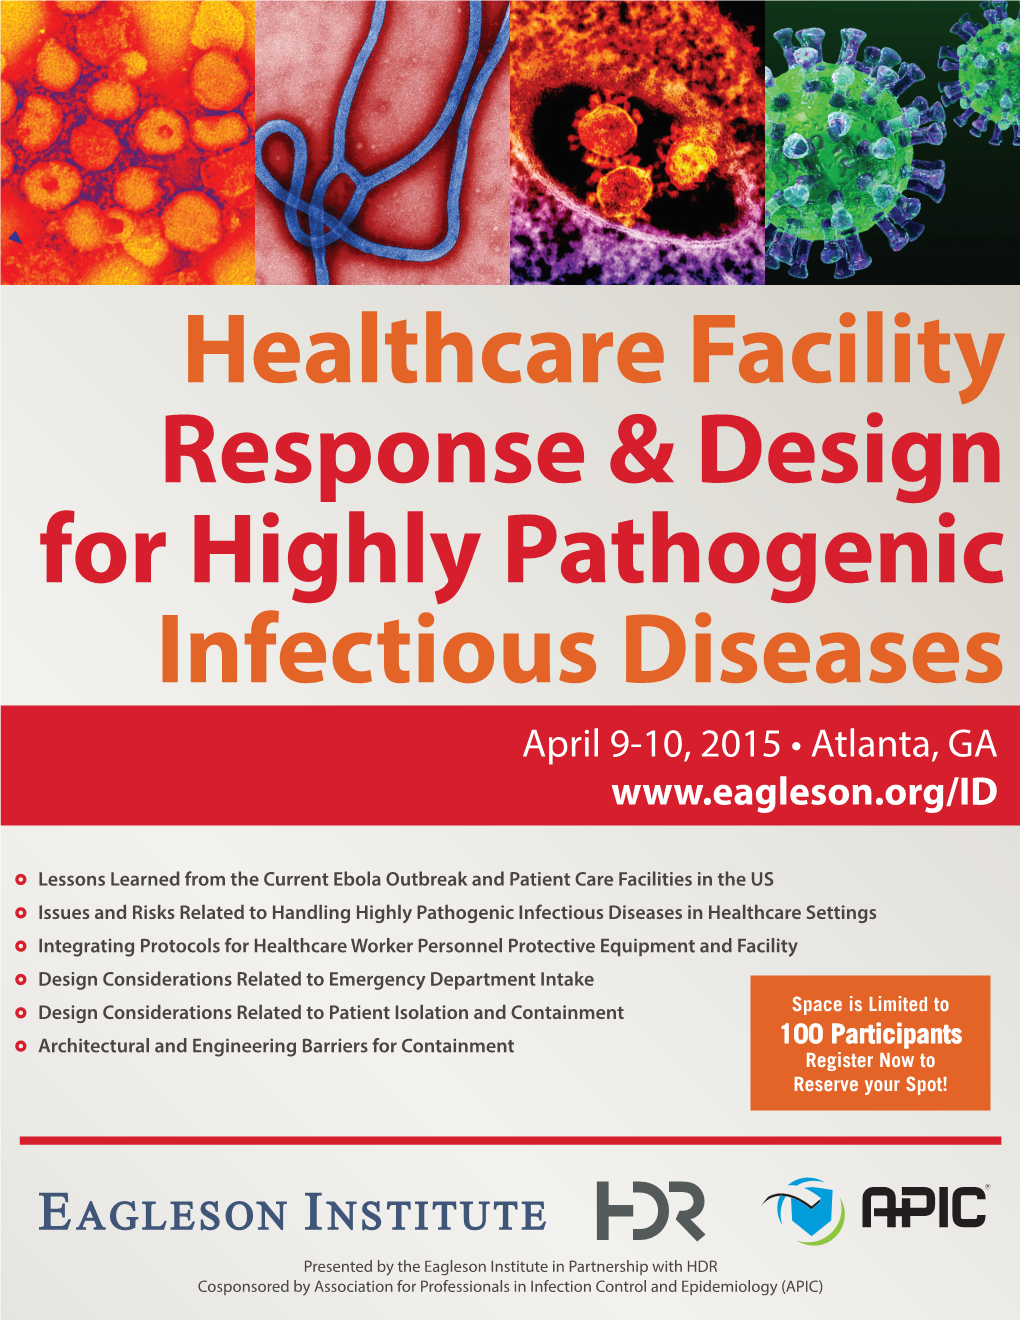 Healthcare Facility Response & Design for Highly Pathogenic